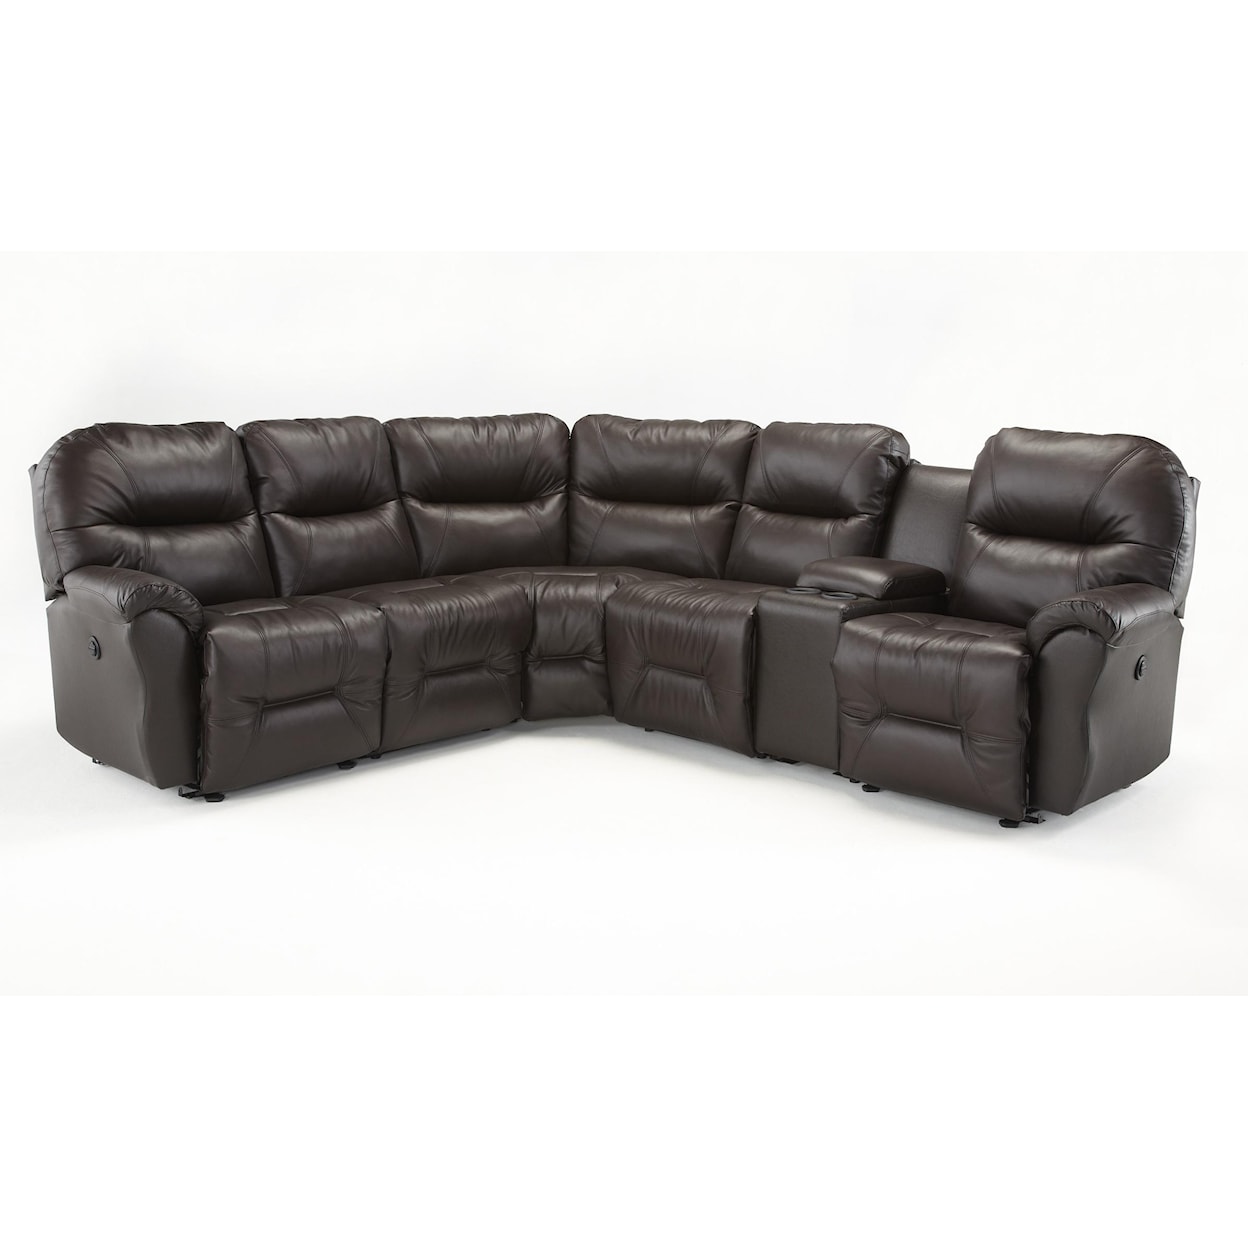 Best Home Furnishings Allure Collection 6 Pc Reclining Sectional Sofa